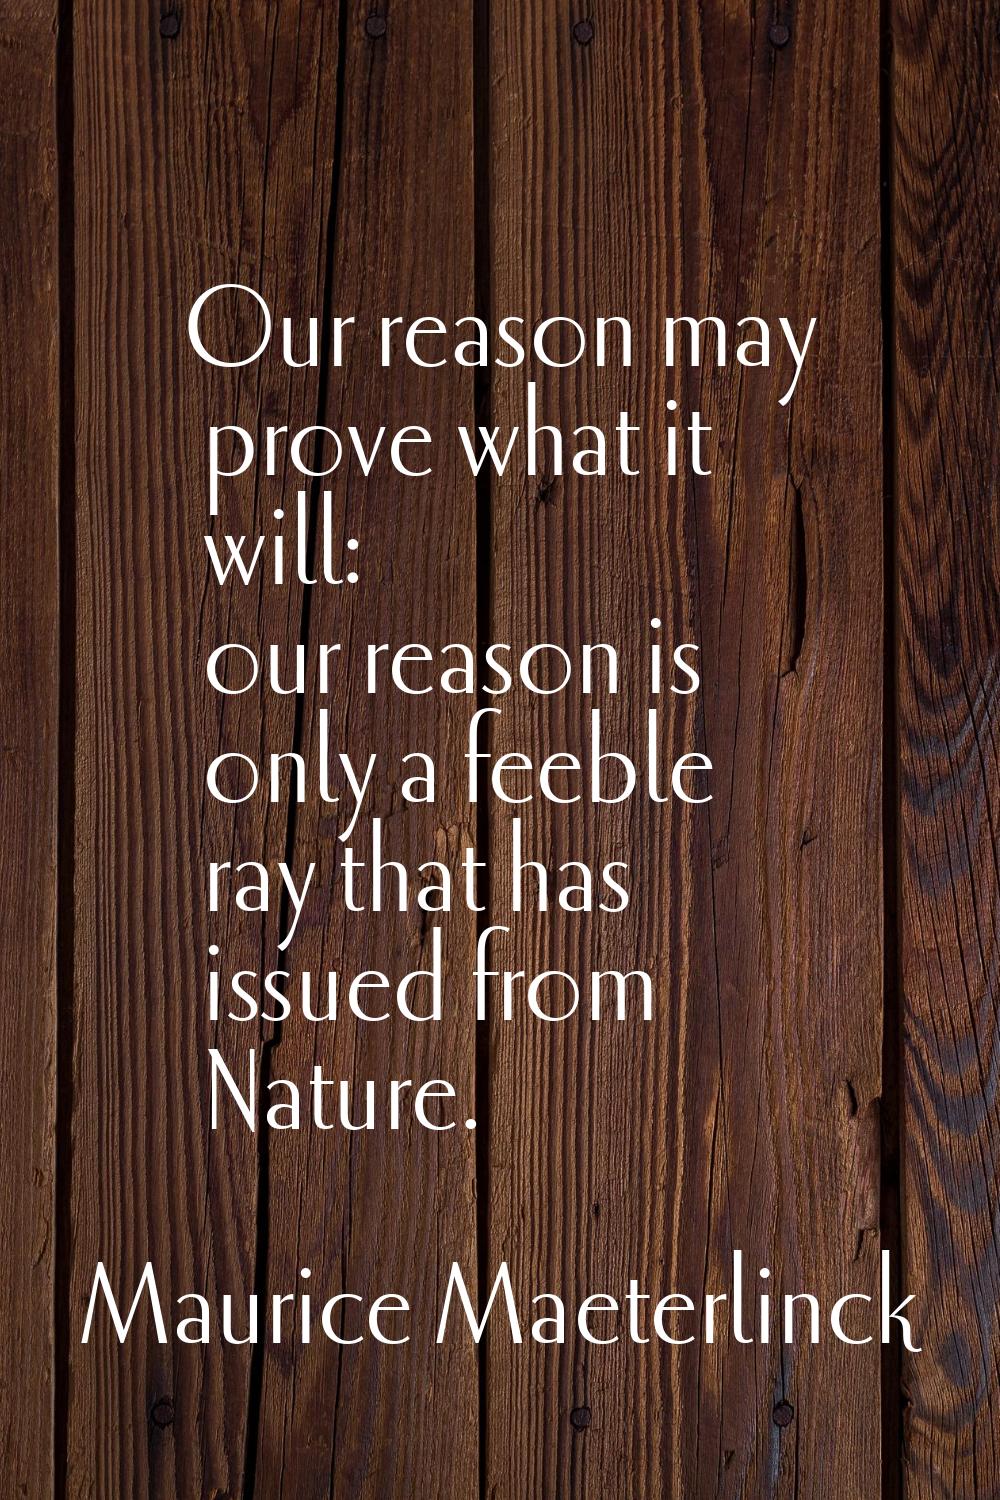 Our reason may prove what it will: our reason is only a feeble ray that has issued from Nature.